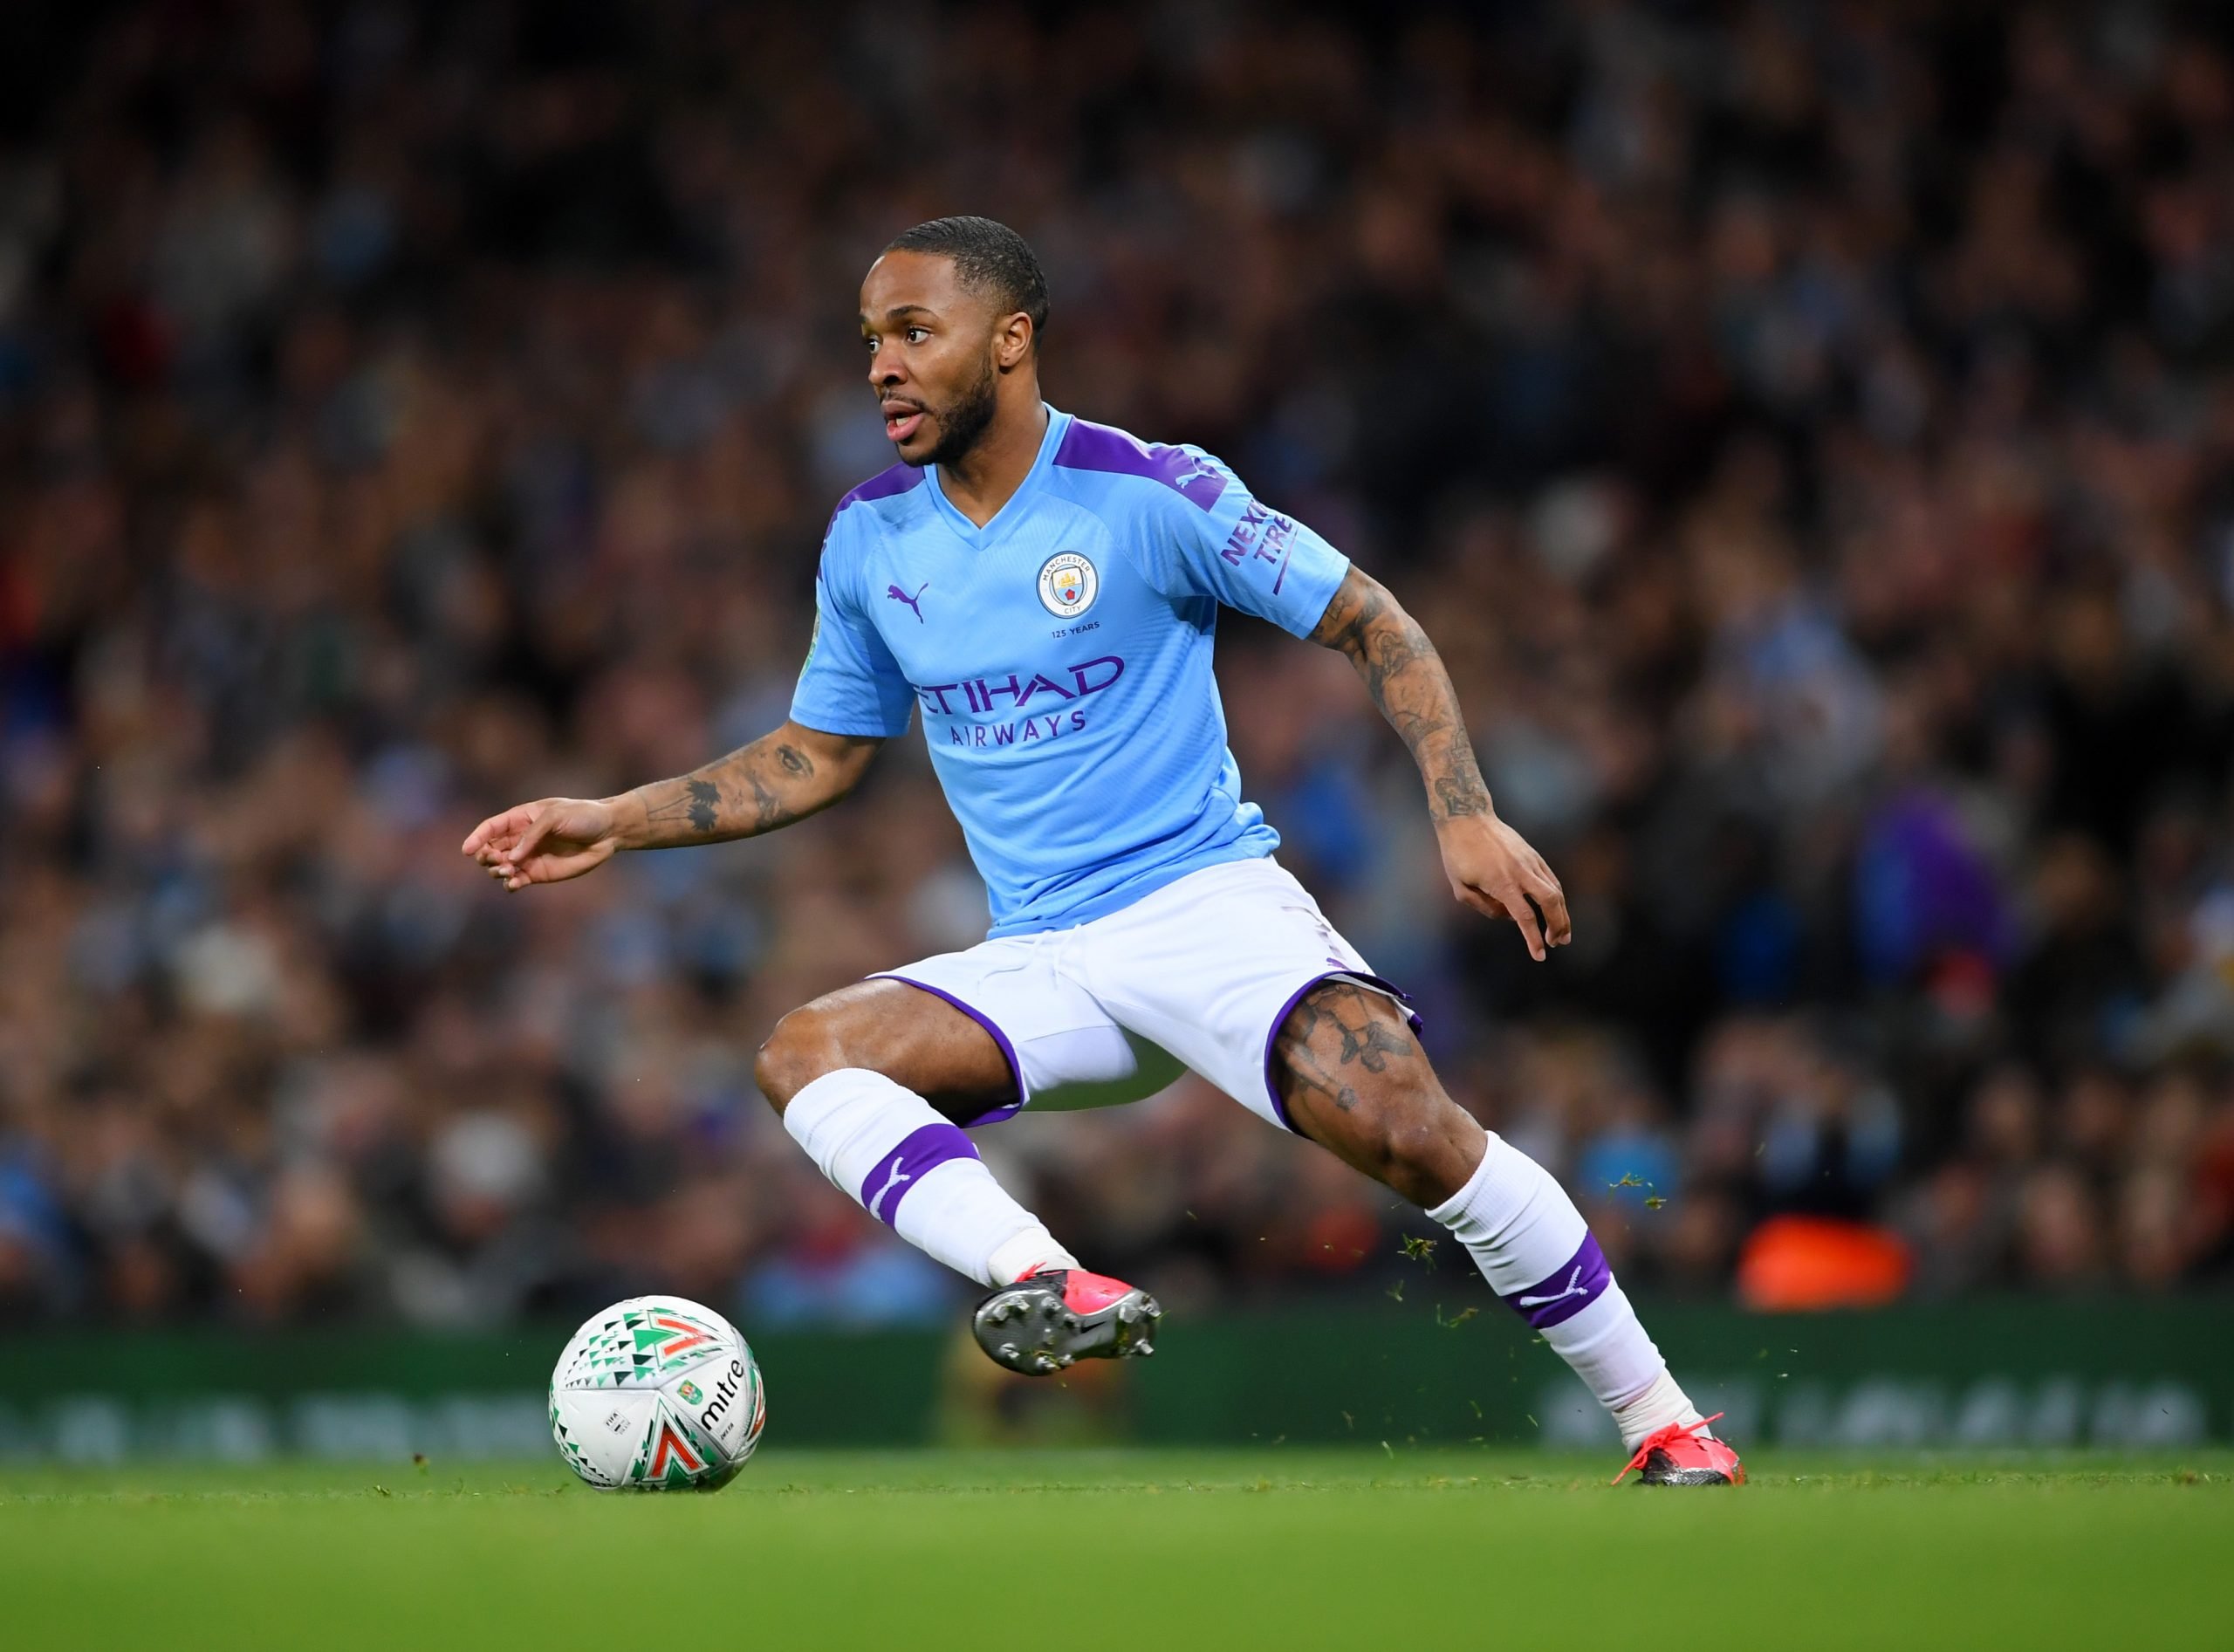 MANCHESTER, ENGLAND - JANUARY 29: Raheem Sterling of Manchester City runs with the ball during the Carabao Cup Semi Final match between Manchester City and Manchester United at Etihad Stadium on January 29, 2020 in Manchester, England. (Photo by Laurence Griffiths/Getty Images)